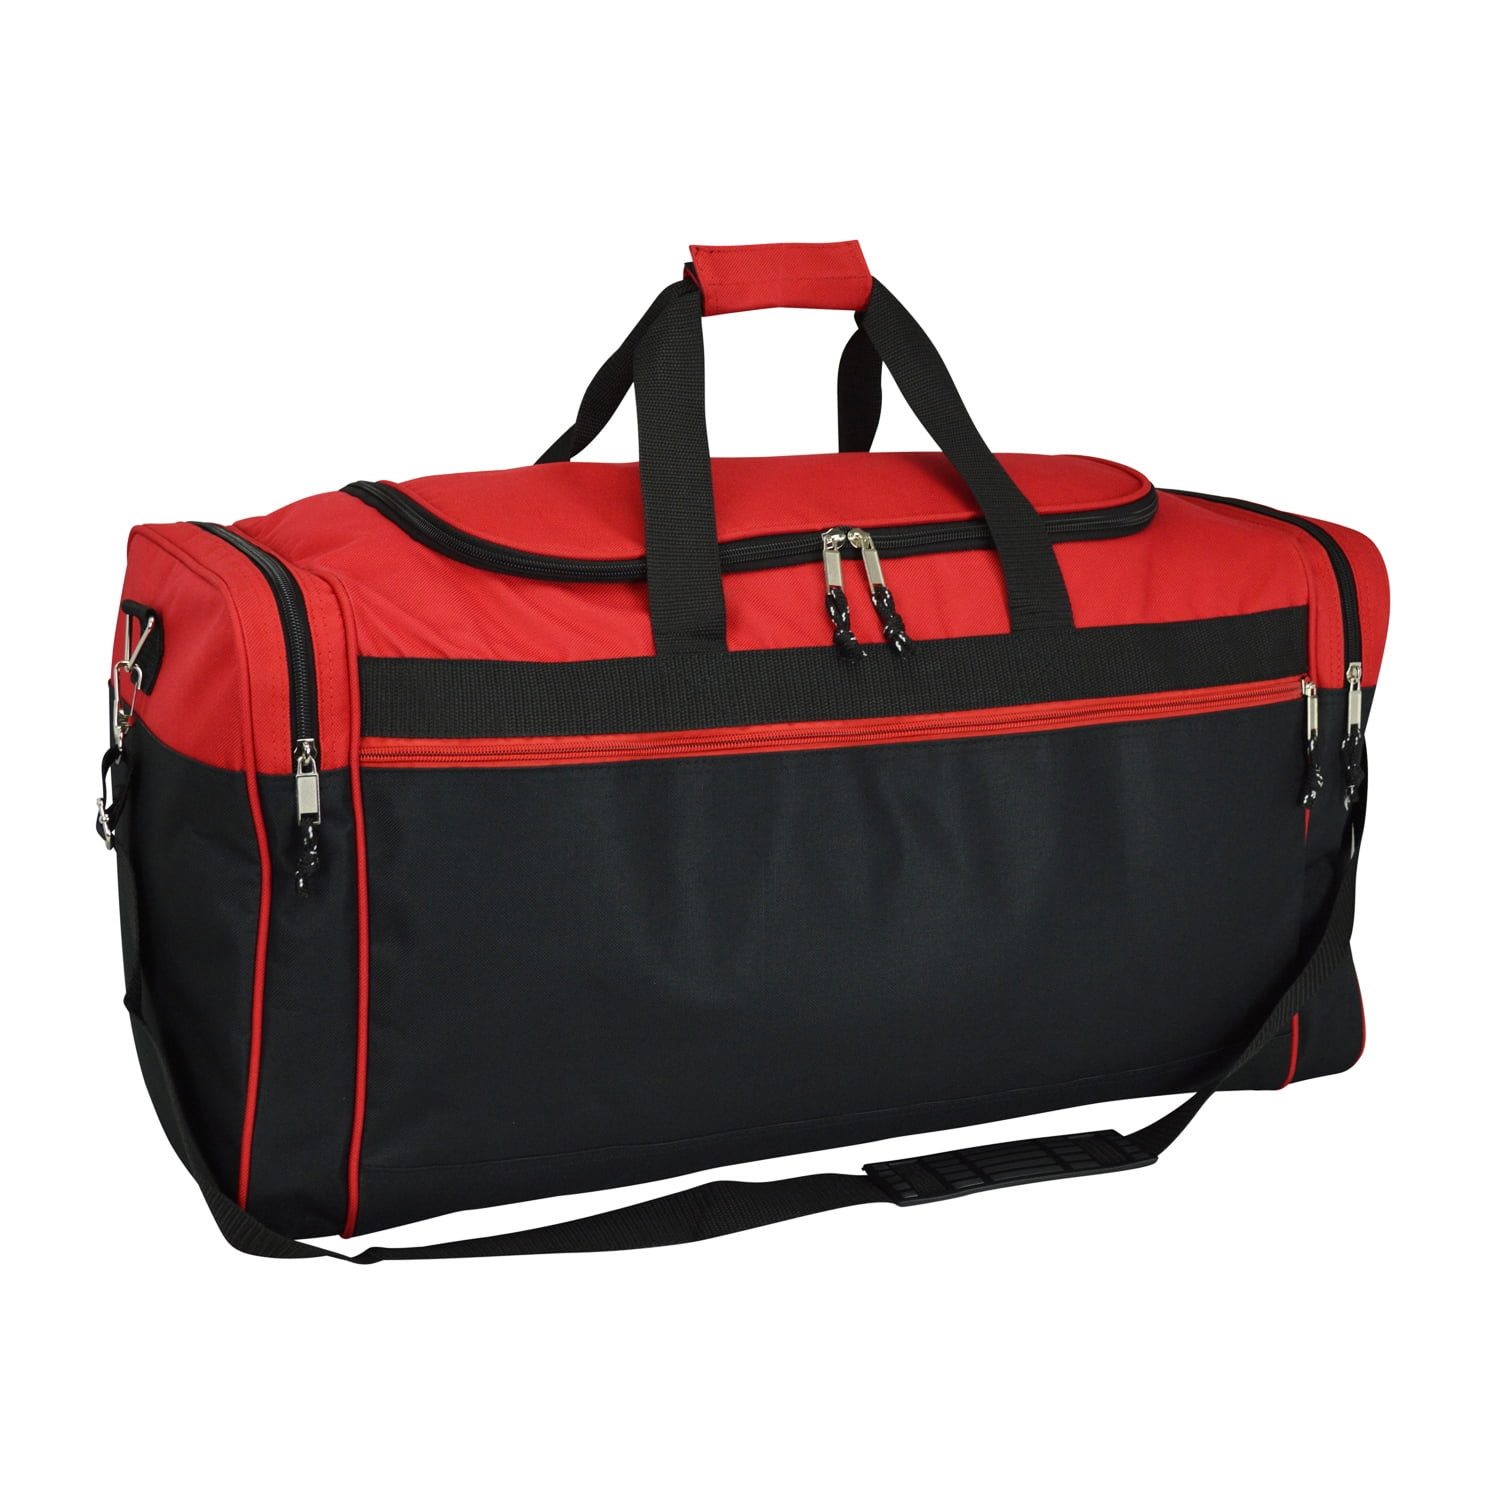 DALIX 25" Extra Large Vacation Travel Duffle Bag in Red